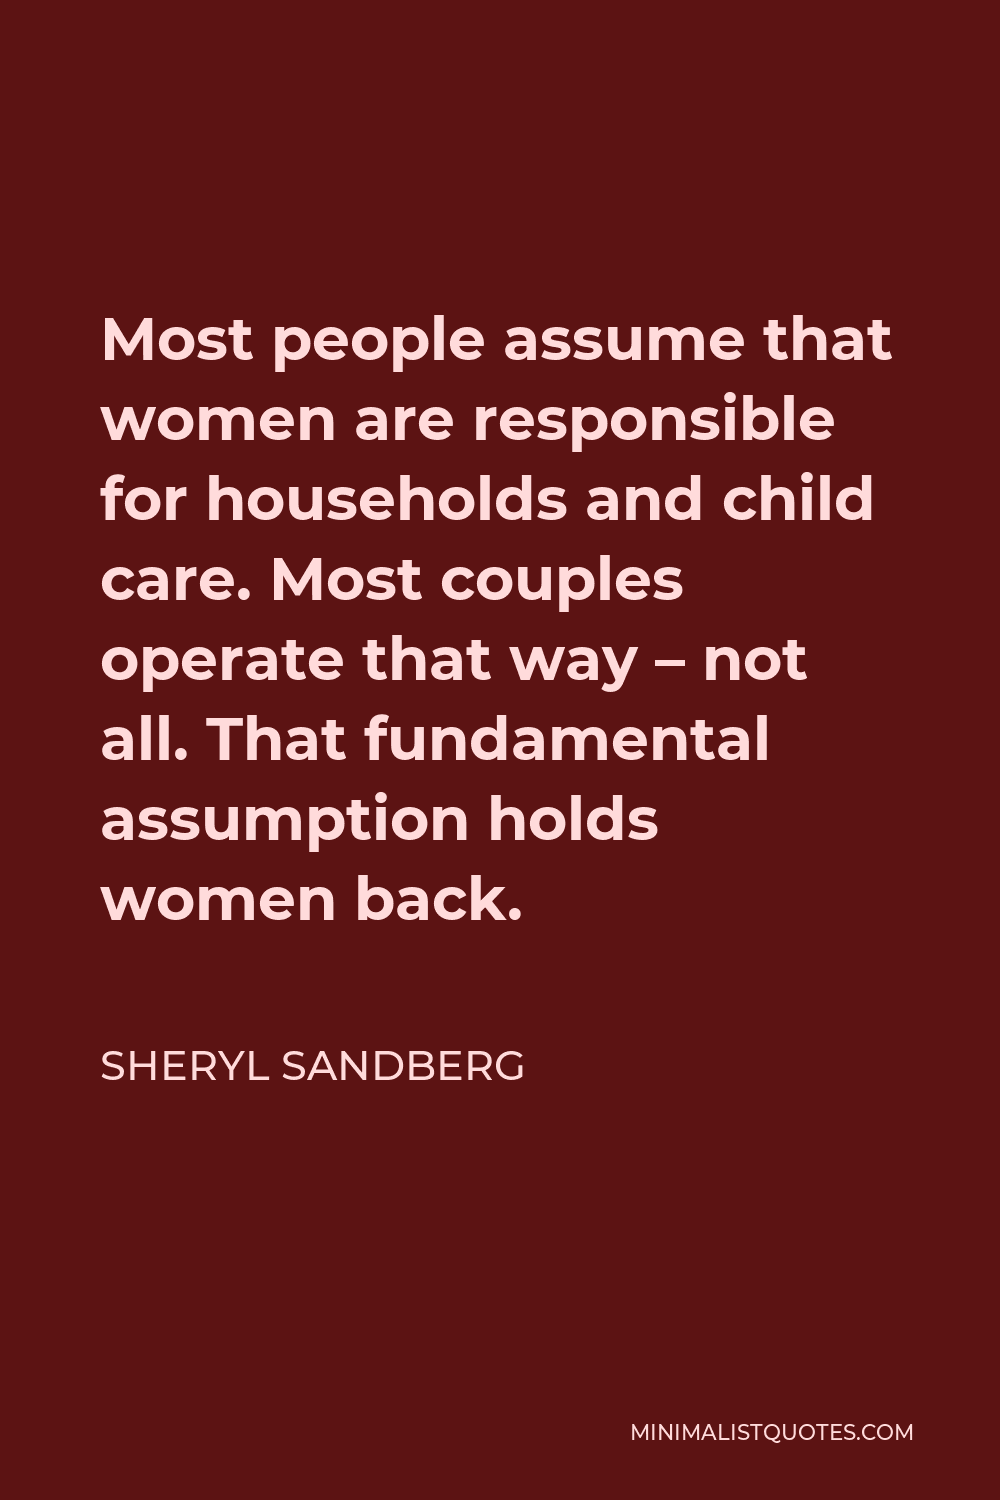 Sheryl Sandberg Quote - Most people assume that women are responsible for households and child care. Most couples operate that way – not all. That fundamental assumption holds women back.